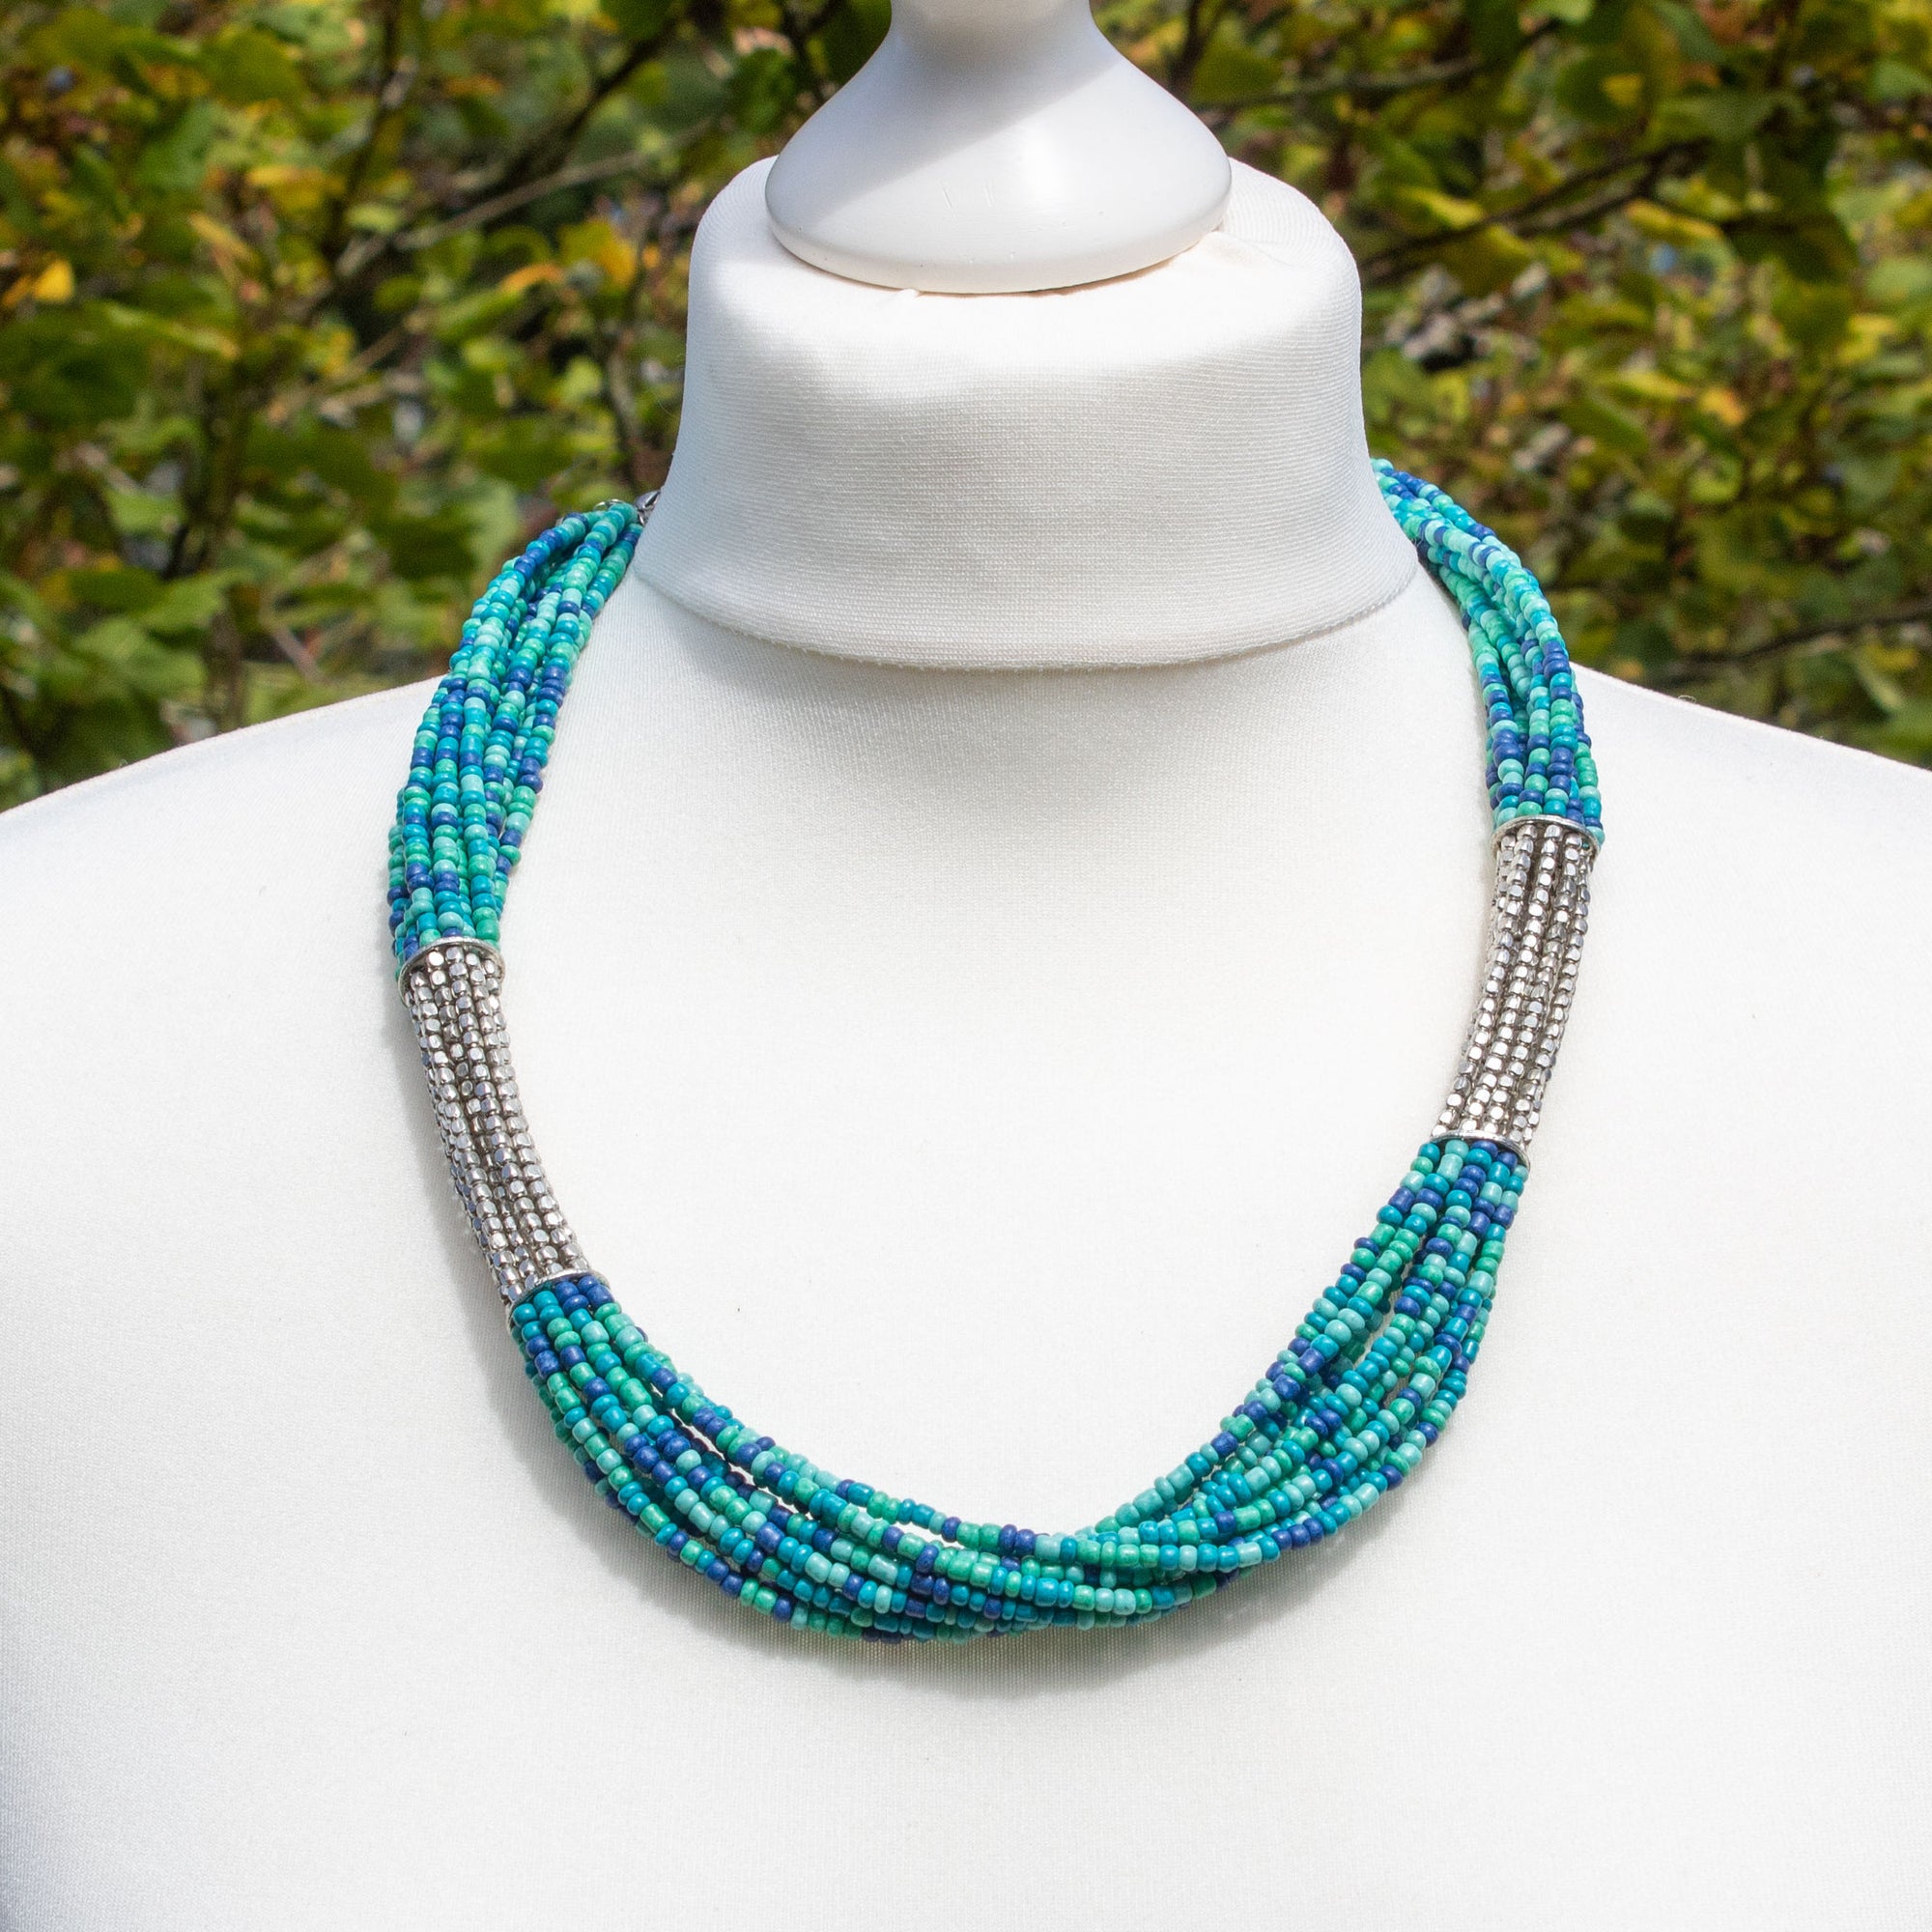 Turquoise & Silver Glass Bead Necklace | Necklace - The Naughty Shrew